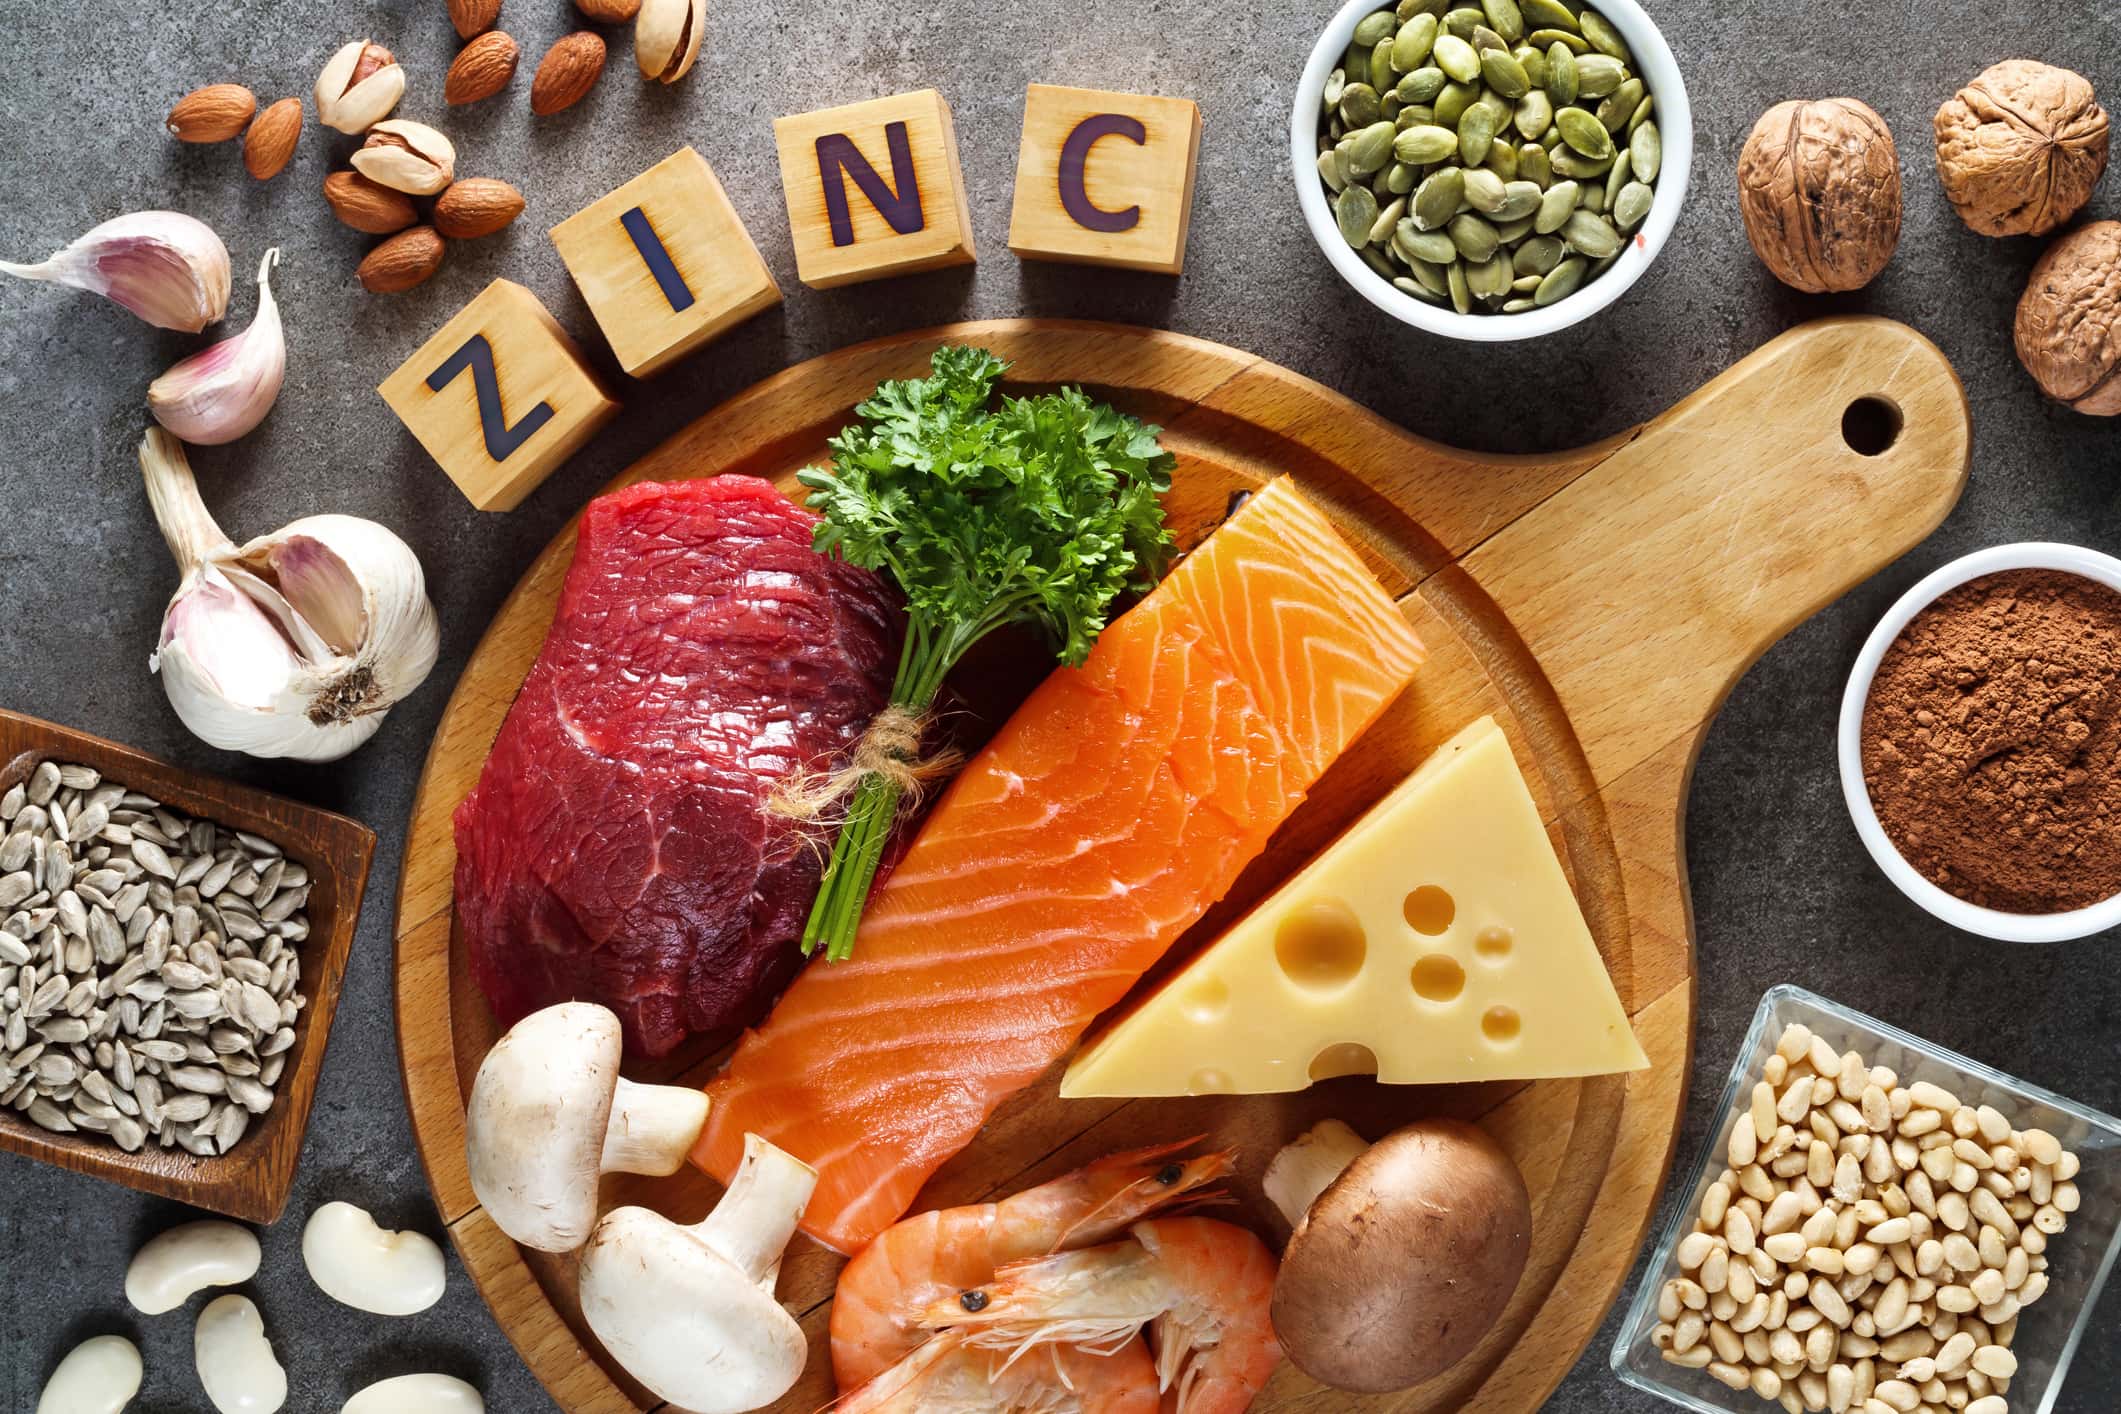 Foods High in Zinc on the table.